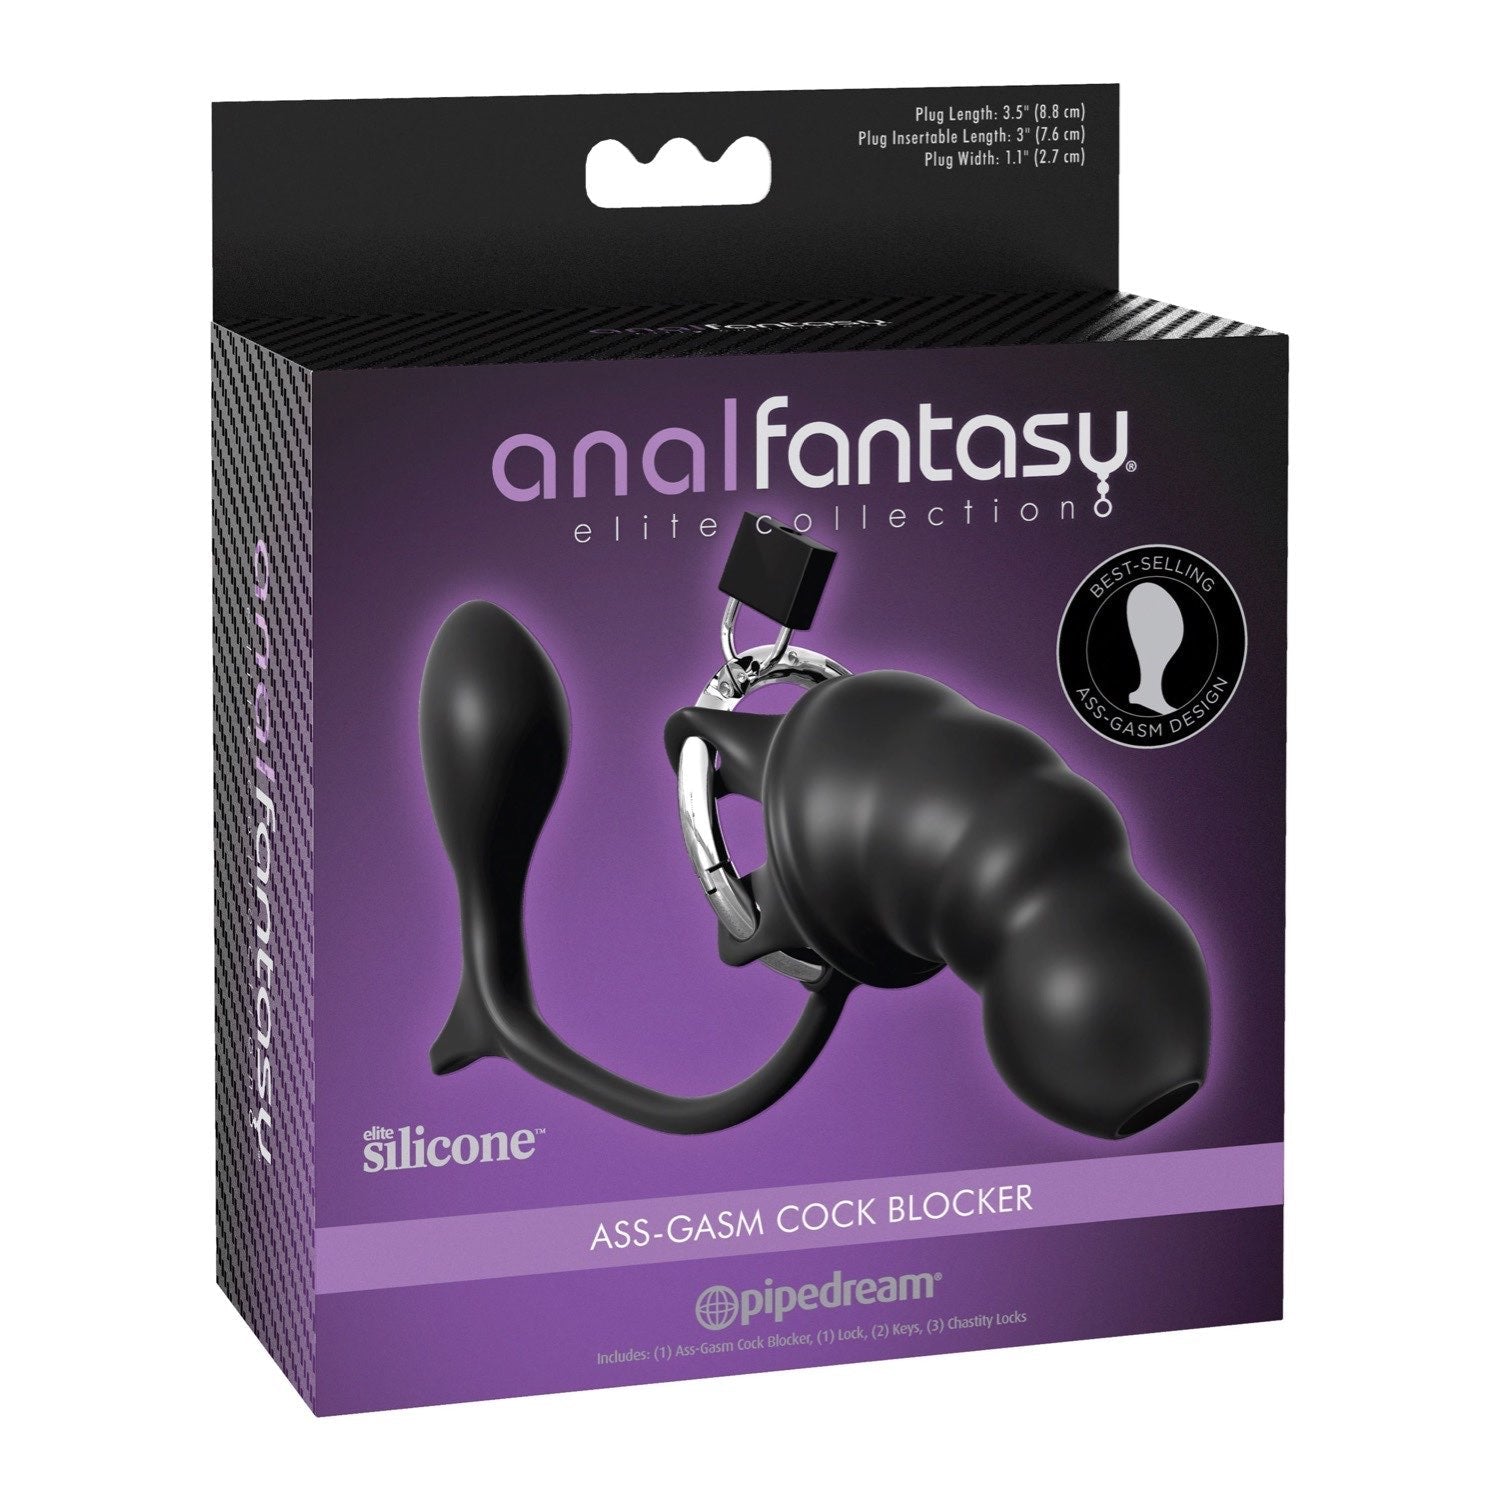 Anal Fantasy Elite Ass-gasm Cock Blocker - Black Penis Cage with Anal Plug by Pipedream